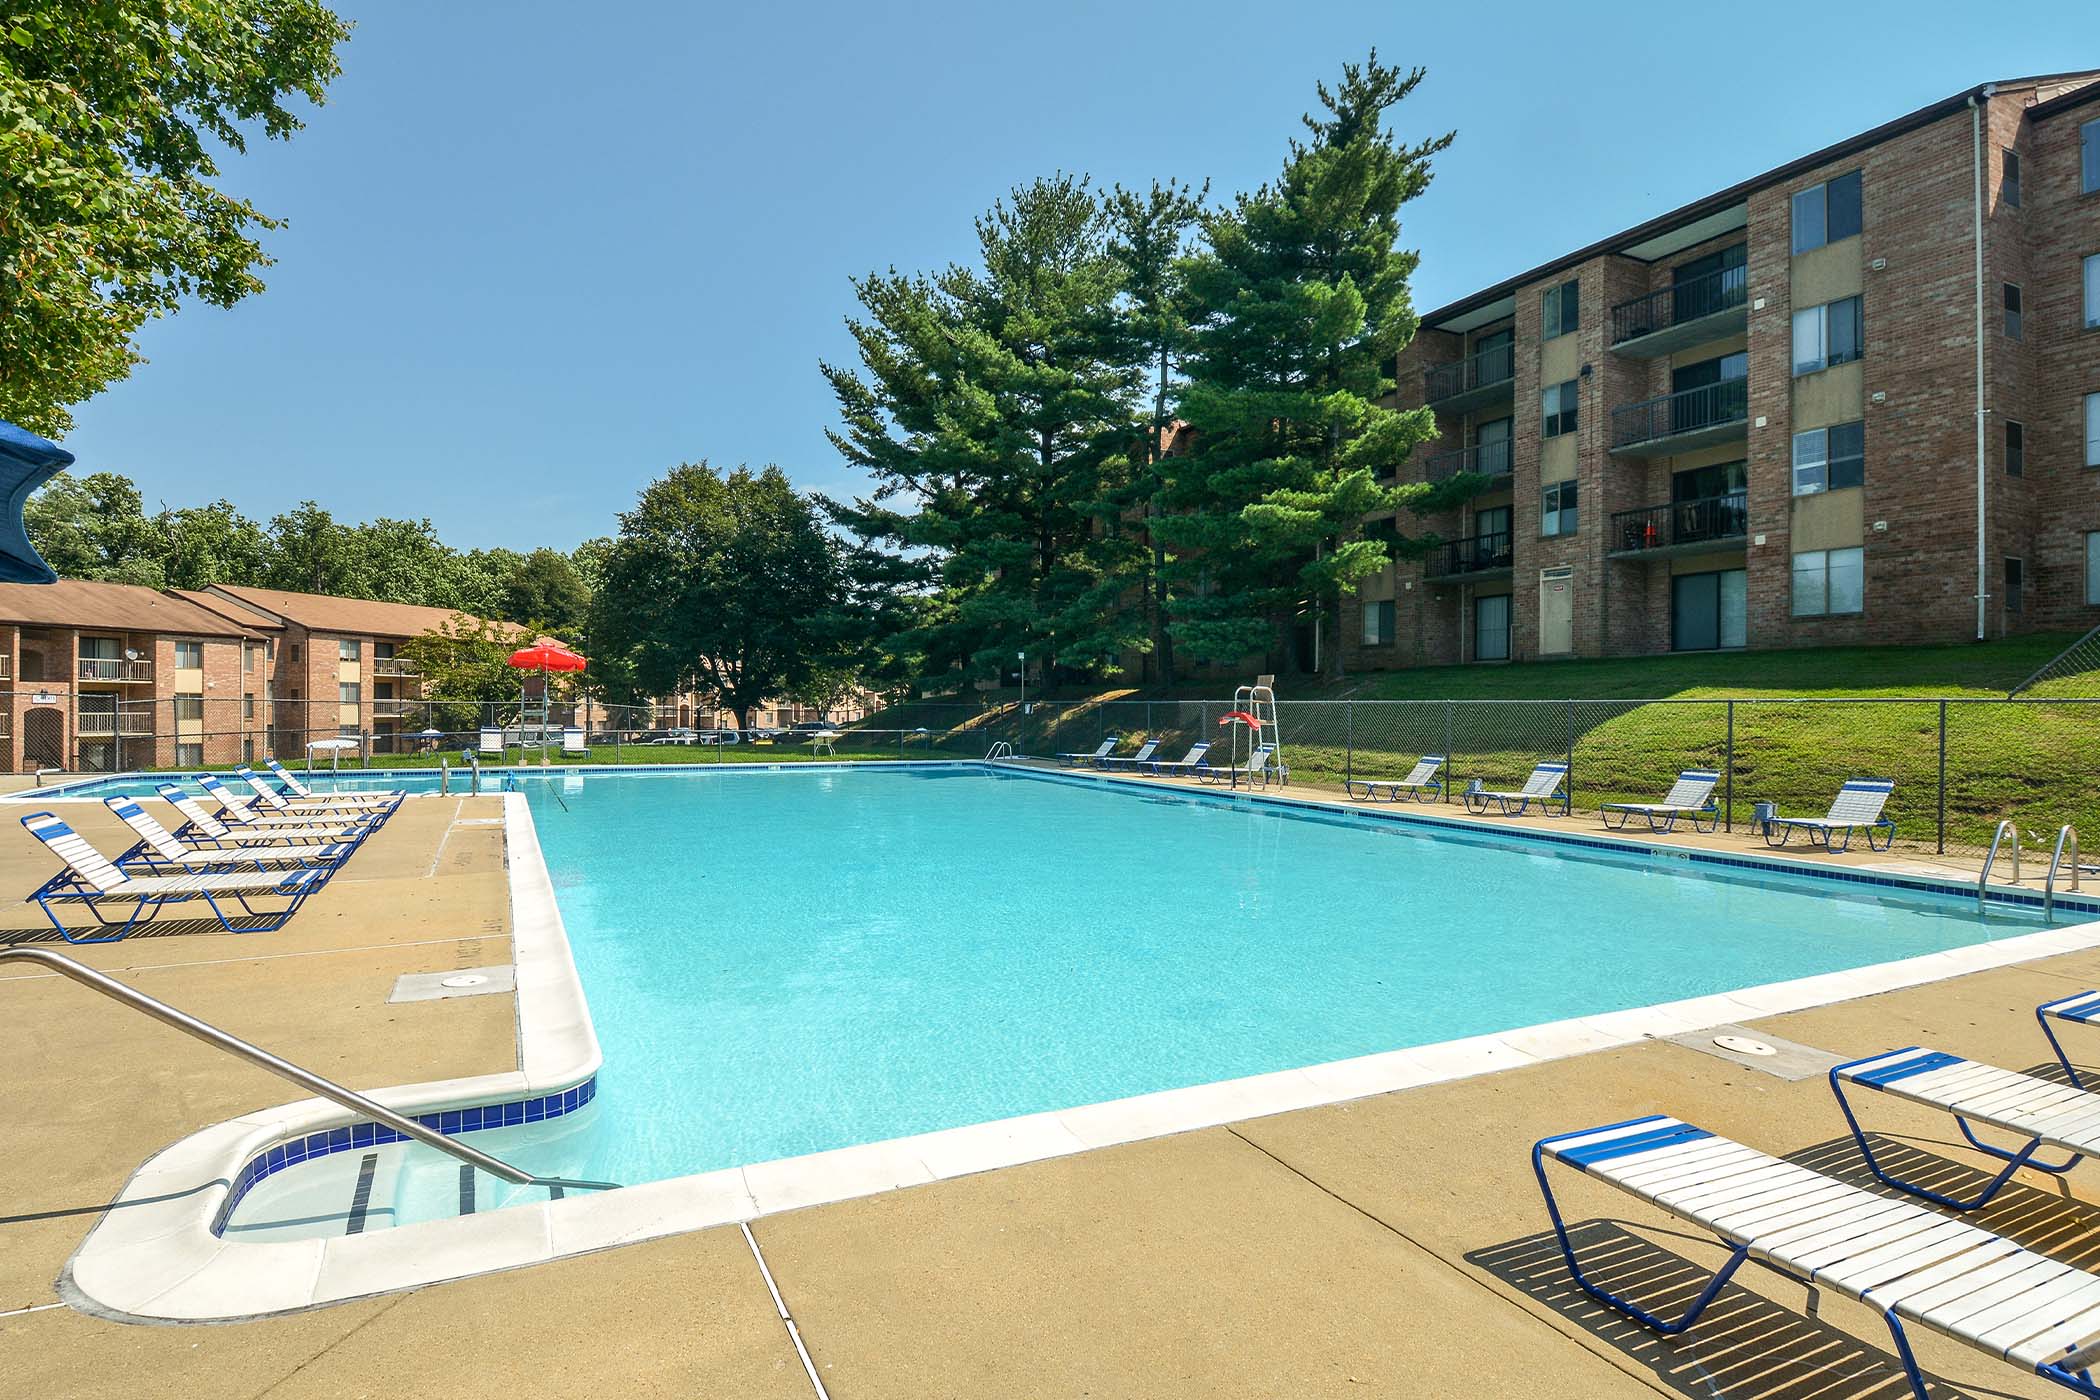 On-site swimming pool at The Flats at Columbia Pike, Silver Spring, Maryland